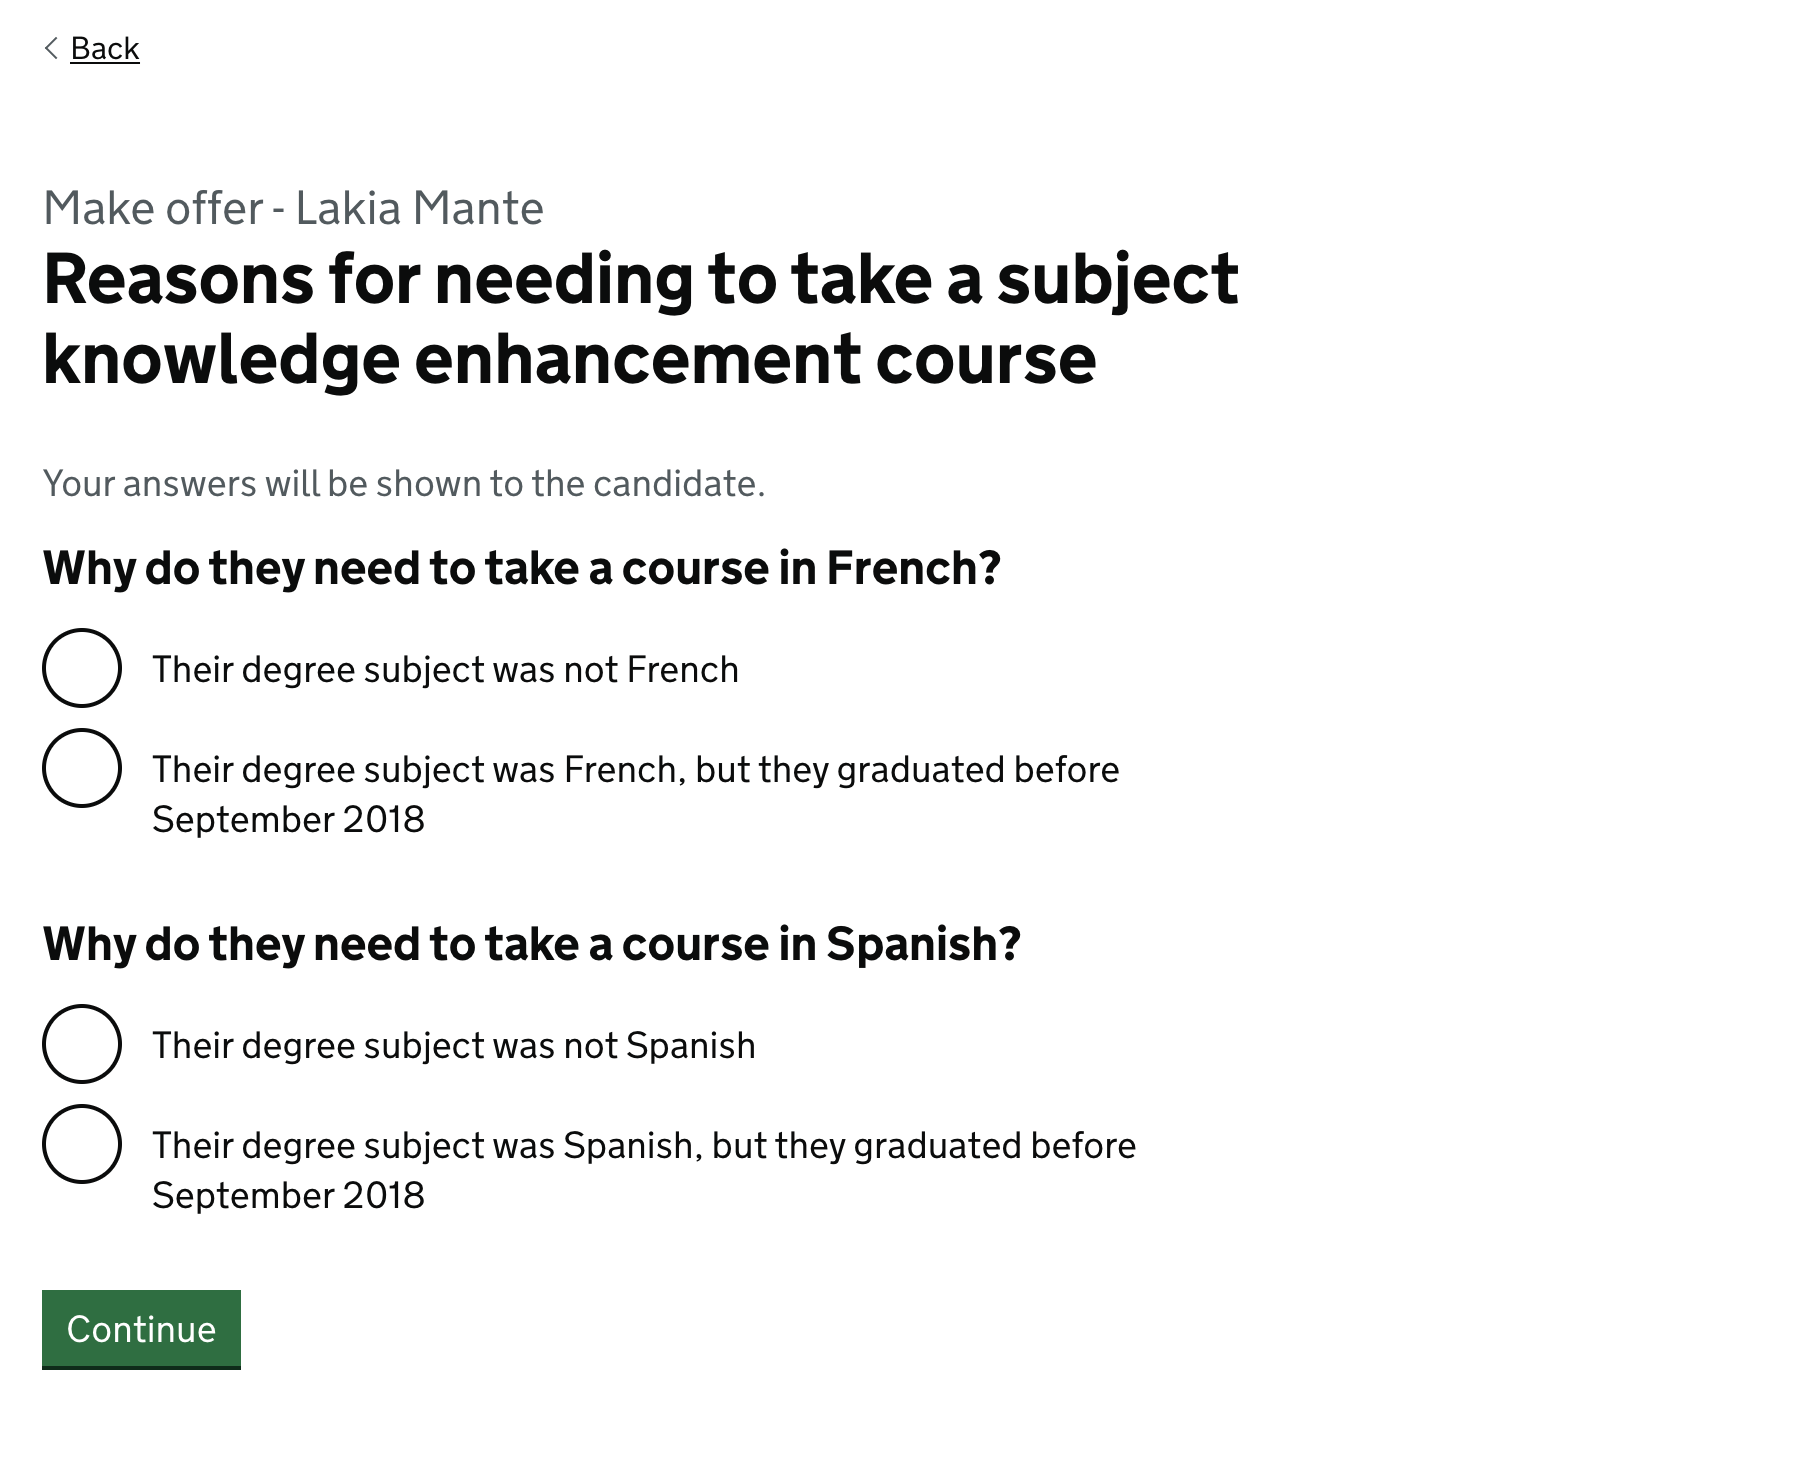 Screenshot with the heading ‘Reasons for needing to take a subject knowledge enhancement (SKE) course’. Beneath this there are two subheadings labelled ‘Why do they need to take a course in French?’ and ‘Why do they need to take a course in Spanish?’. Each question has the same 2 answers as radio buttons: ‘Their degree subject was not (language)’ and ‘Their degree subject was (language) but they graduated before September 2018’